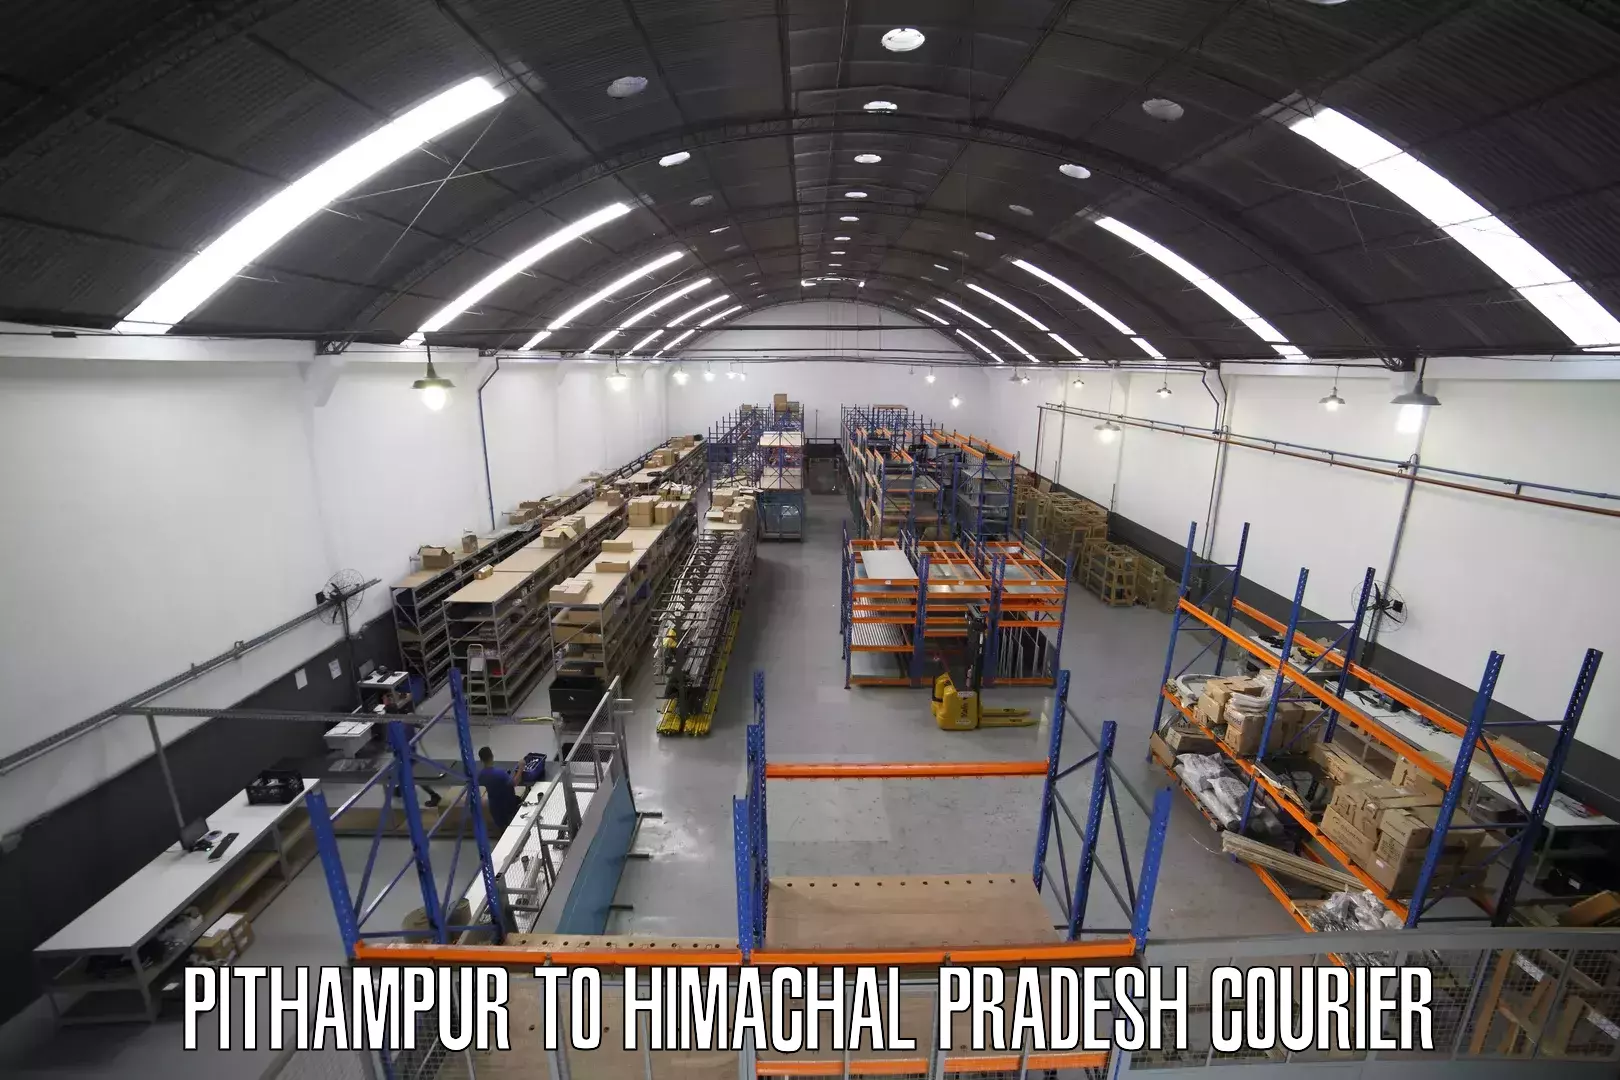 Express delivery network Pithampur to Himachal Pradesh